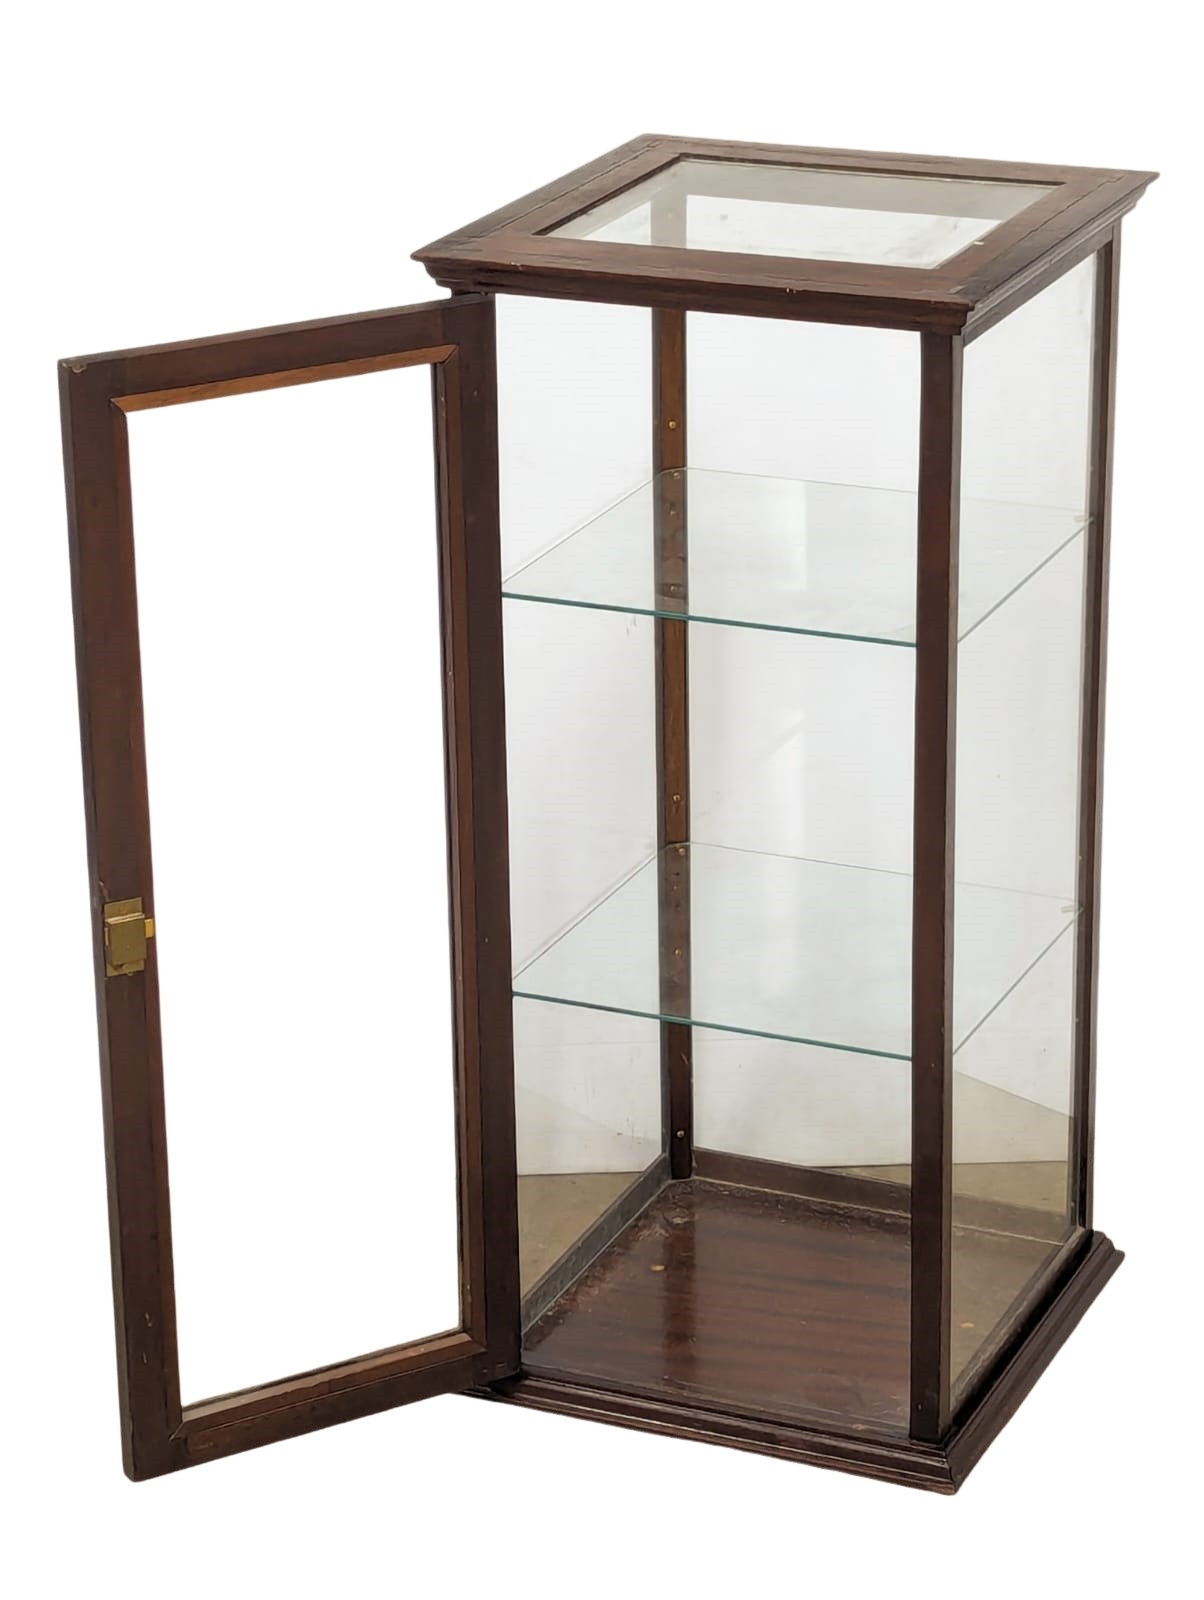 A vintage tabletop mahogany glazed display cabinet with 2 glass shelves. 39x39x84cm - Image 5 of 5